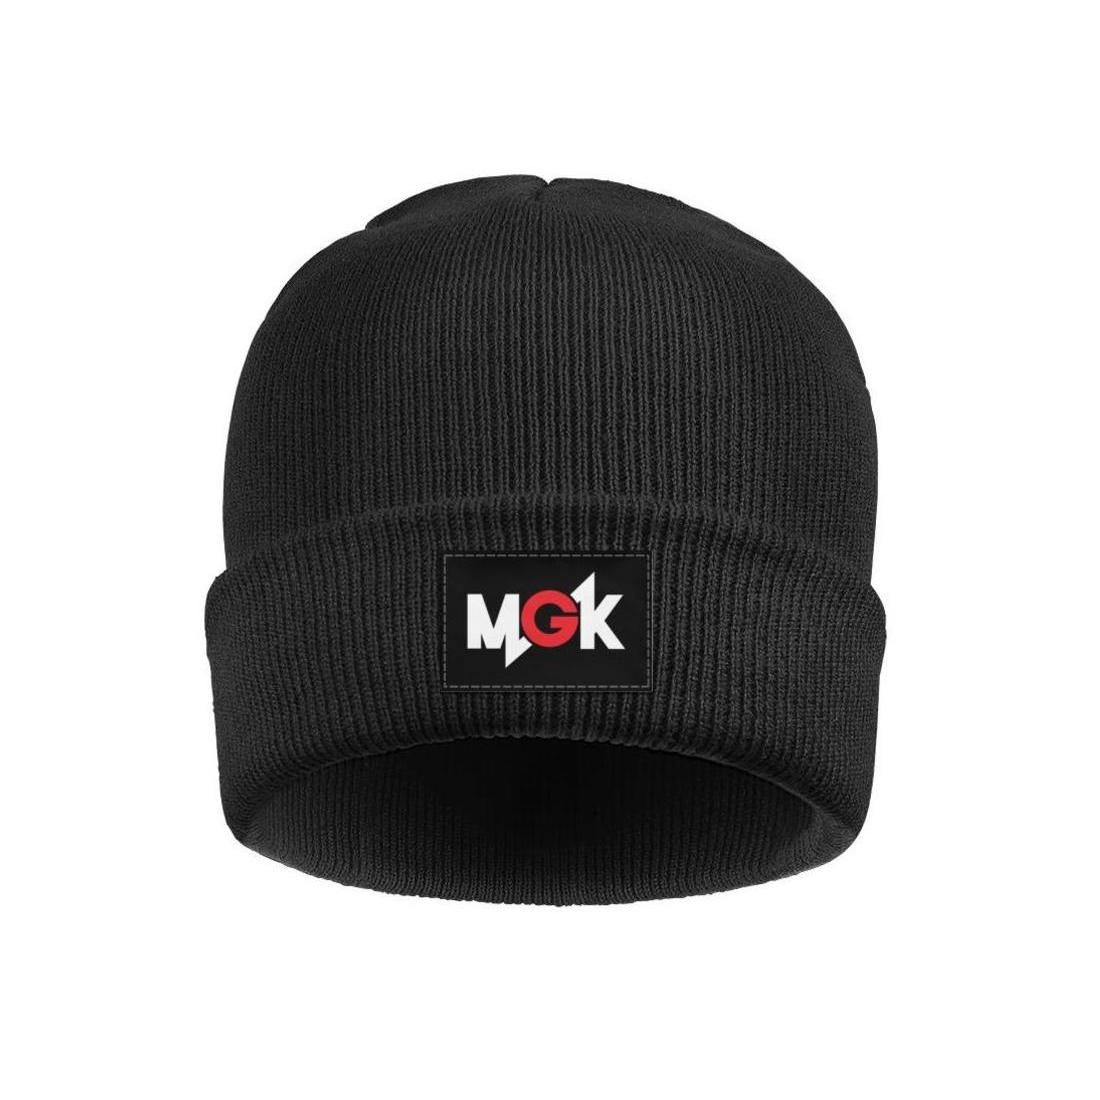 Fashion Machine Gun Rapper Kelly Name Mgk Stretchy Soft Beanie Hats Styles Art Cool Logo Chance Photo The Cool Dry Rapper Logo Sox The From Cosoob 10 31 Dhgate Com